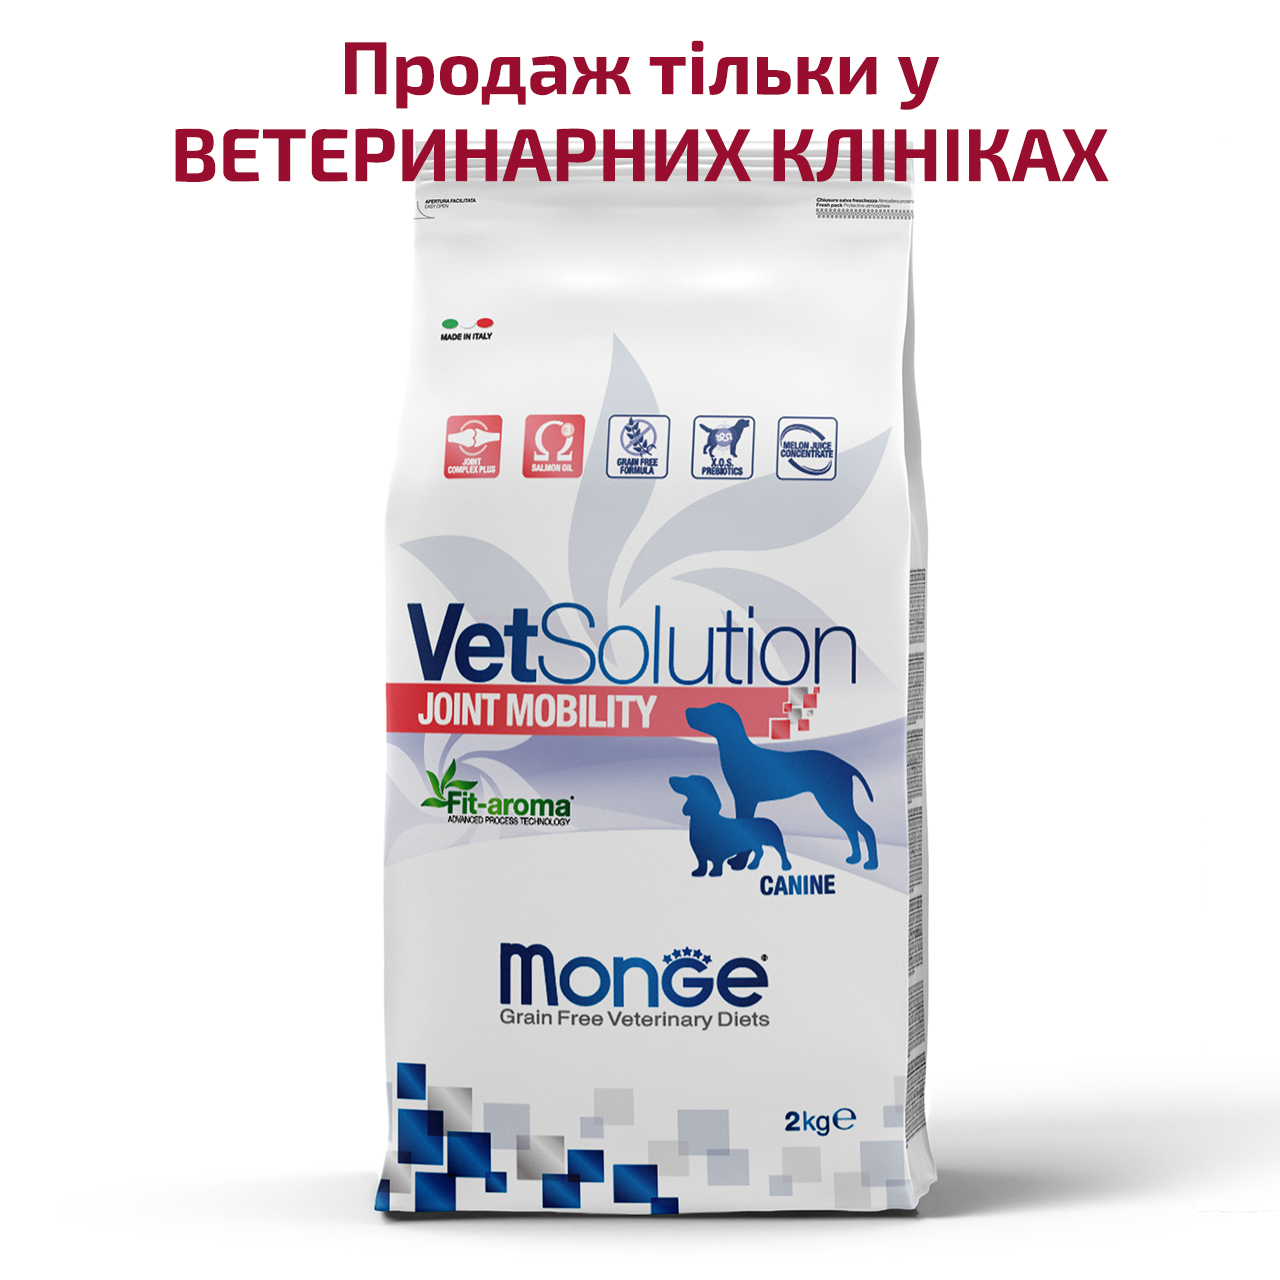 Monge VetSolution Joint mobility canine - фото 1 - id-p1993400721